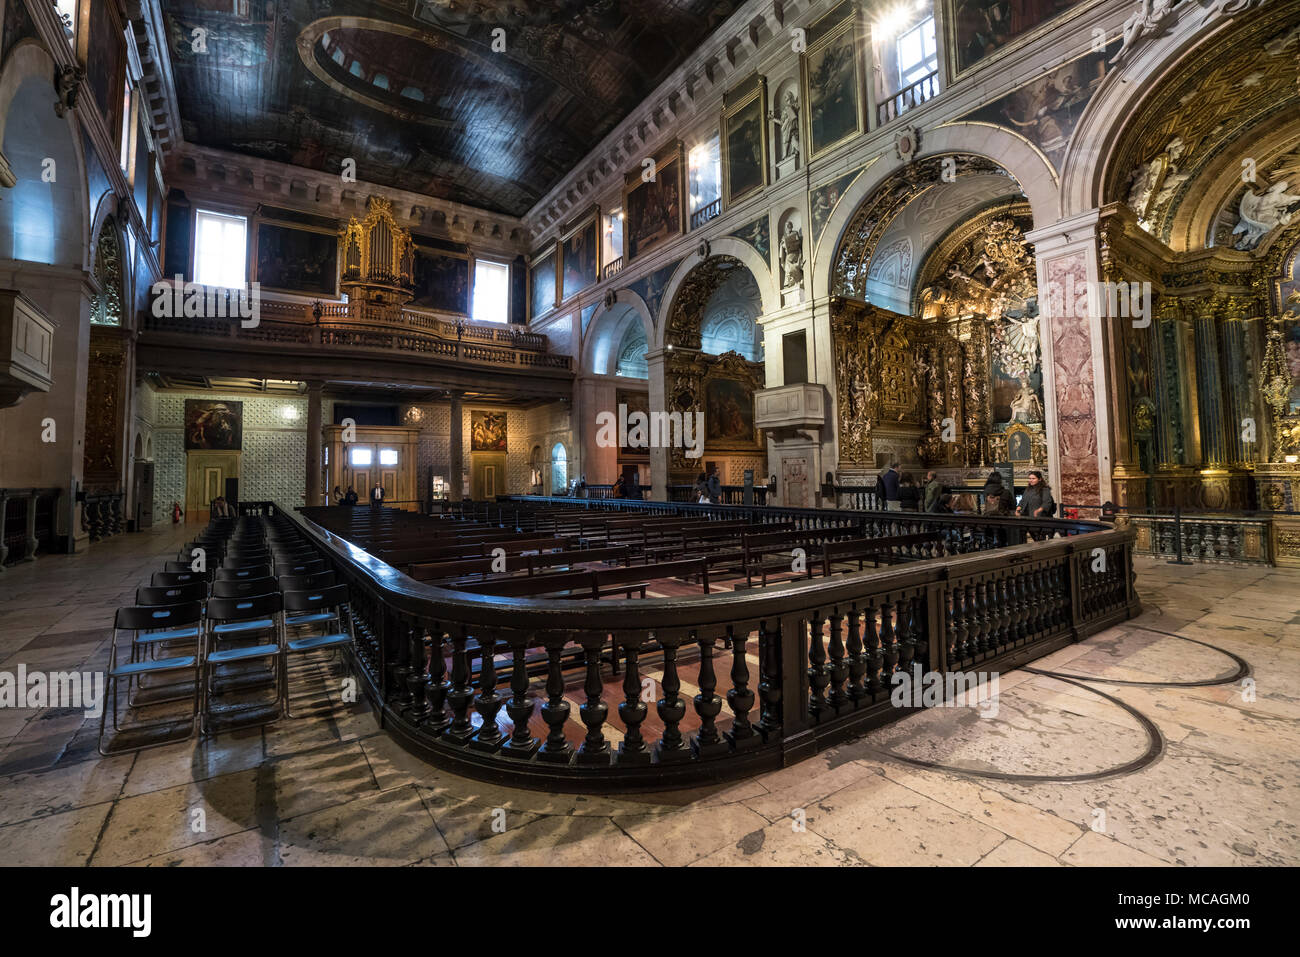 a view of the interior of the Sao Roque church in Lisbon, Portugal Stock Photo